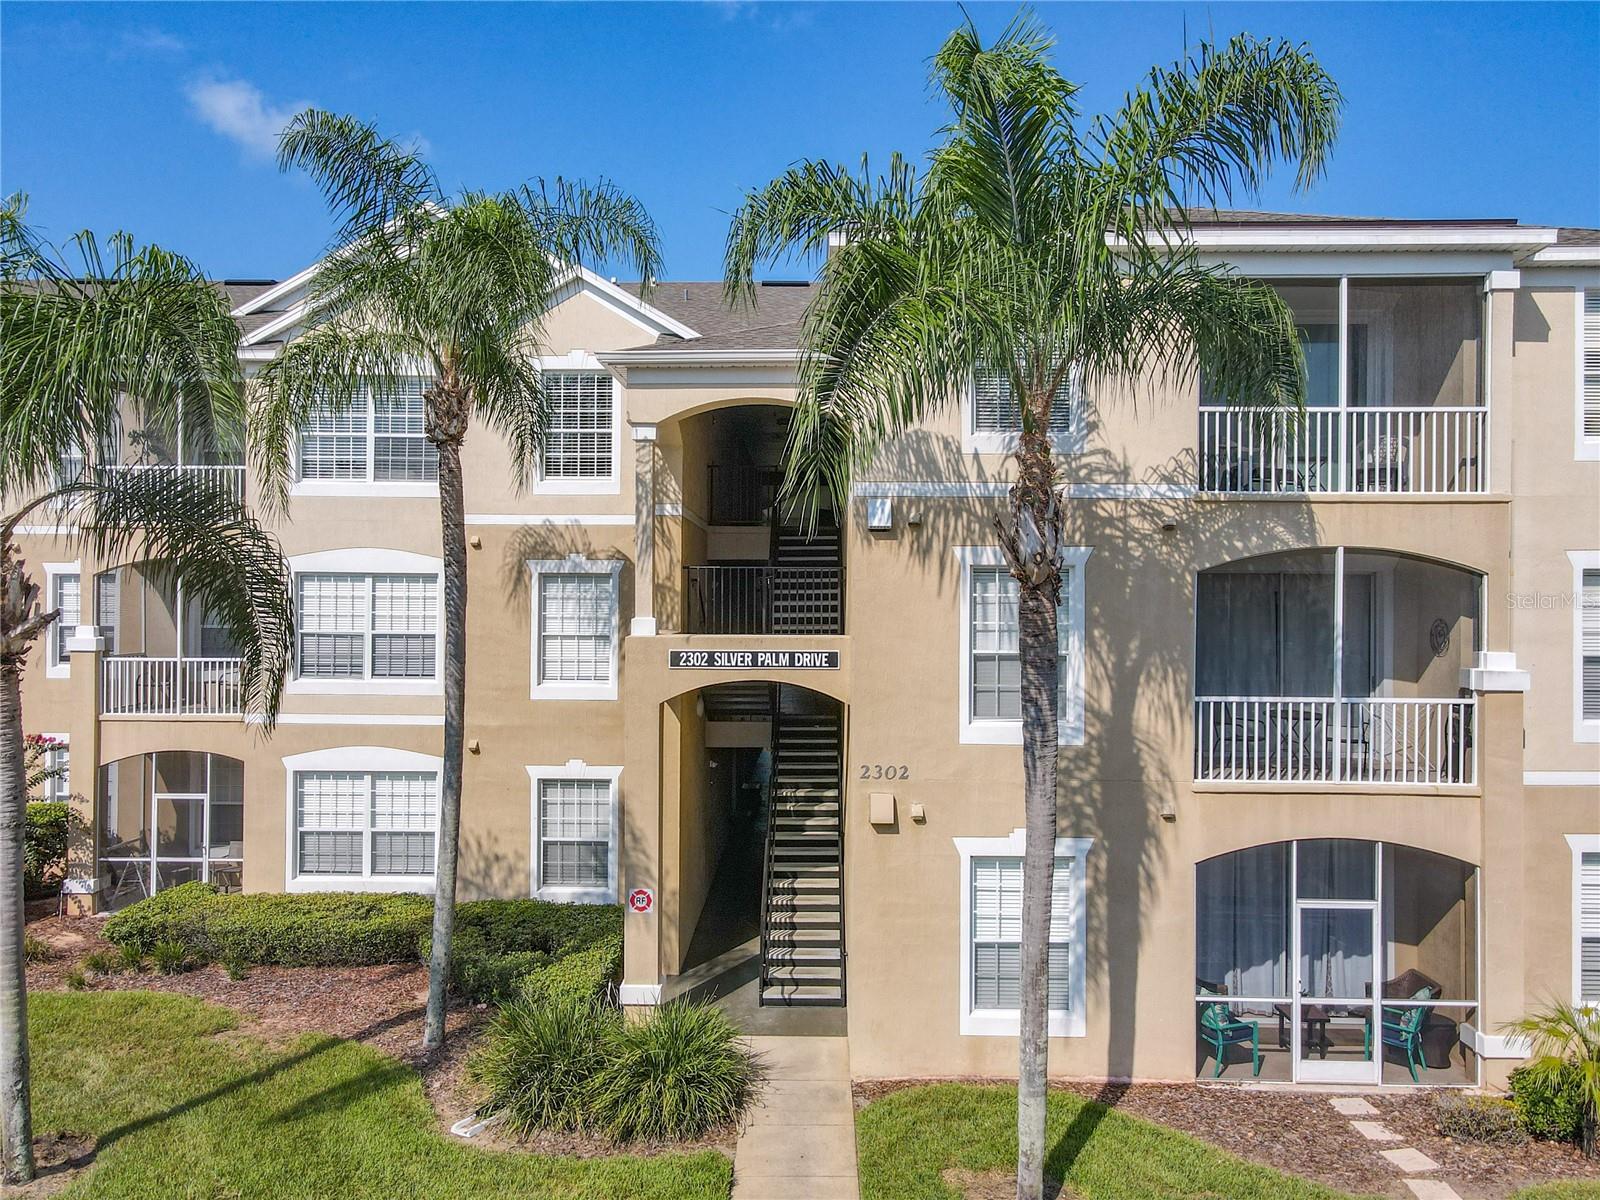 Photo of 2302 SILVER PALM DRIVE, KISSIMMEE, FL 34747